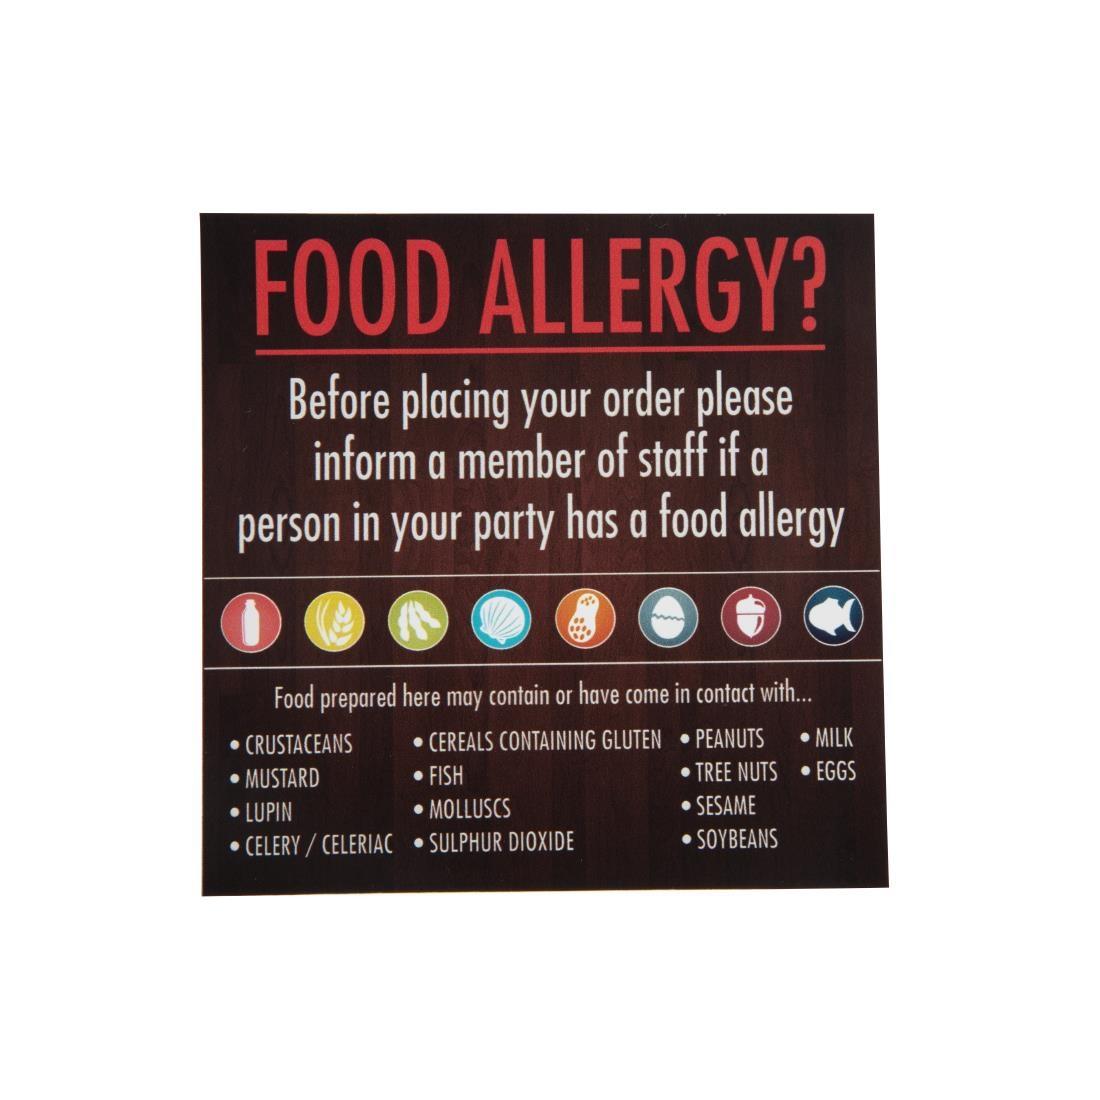 Food Allergen Window and Wall Stickers (Pack of 8) - GM818  - 6